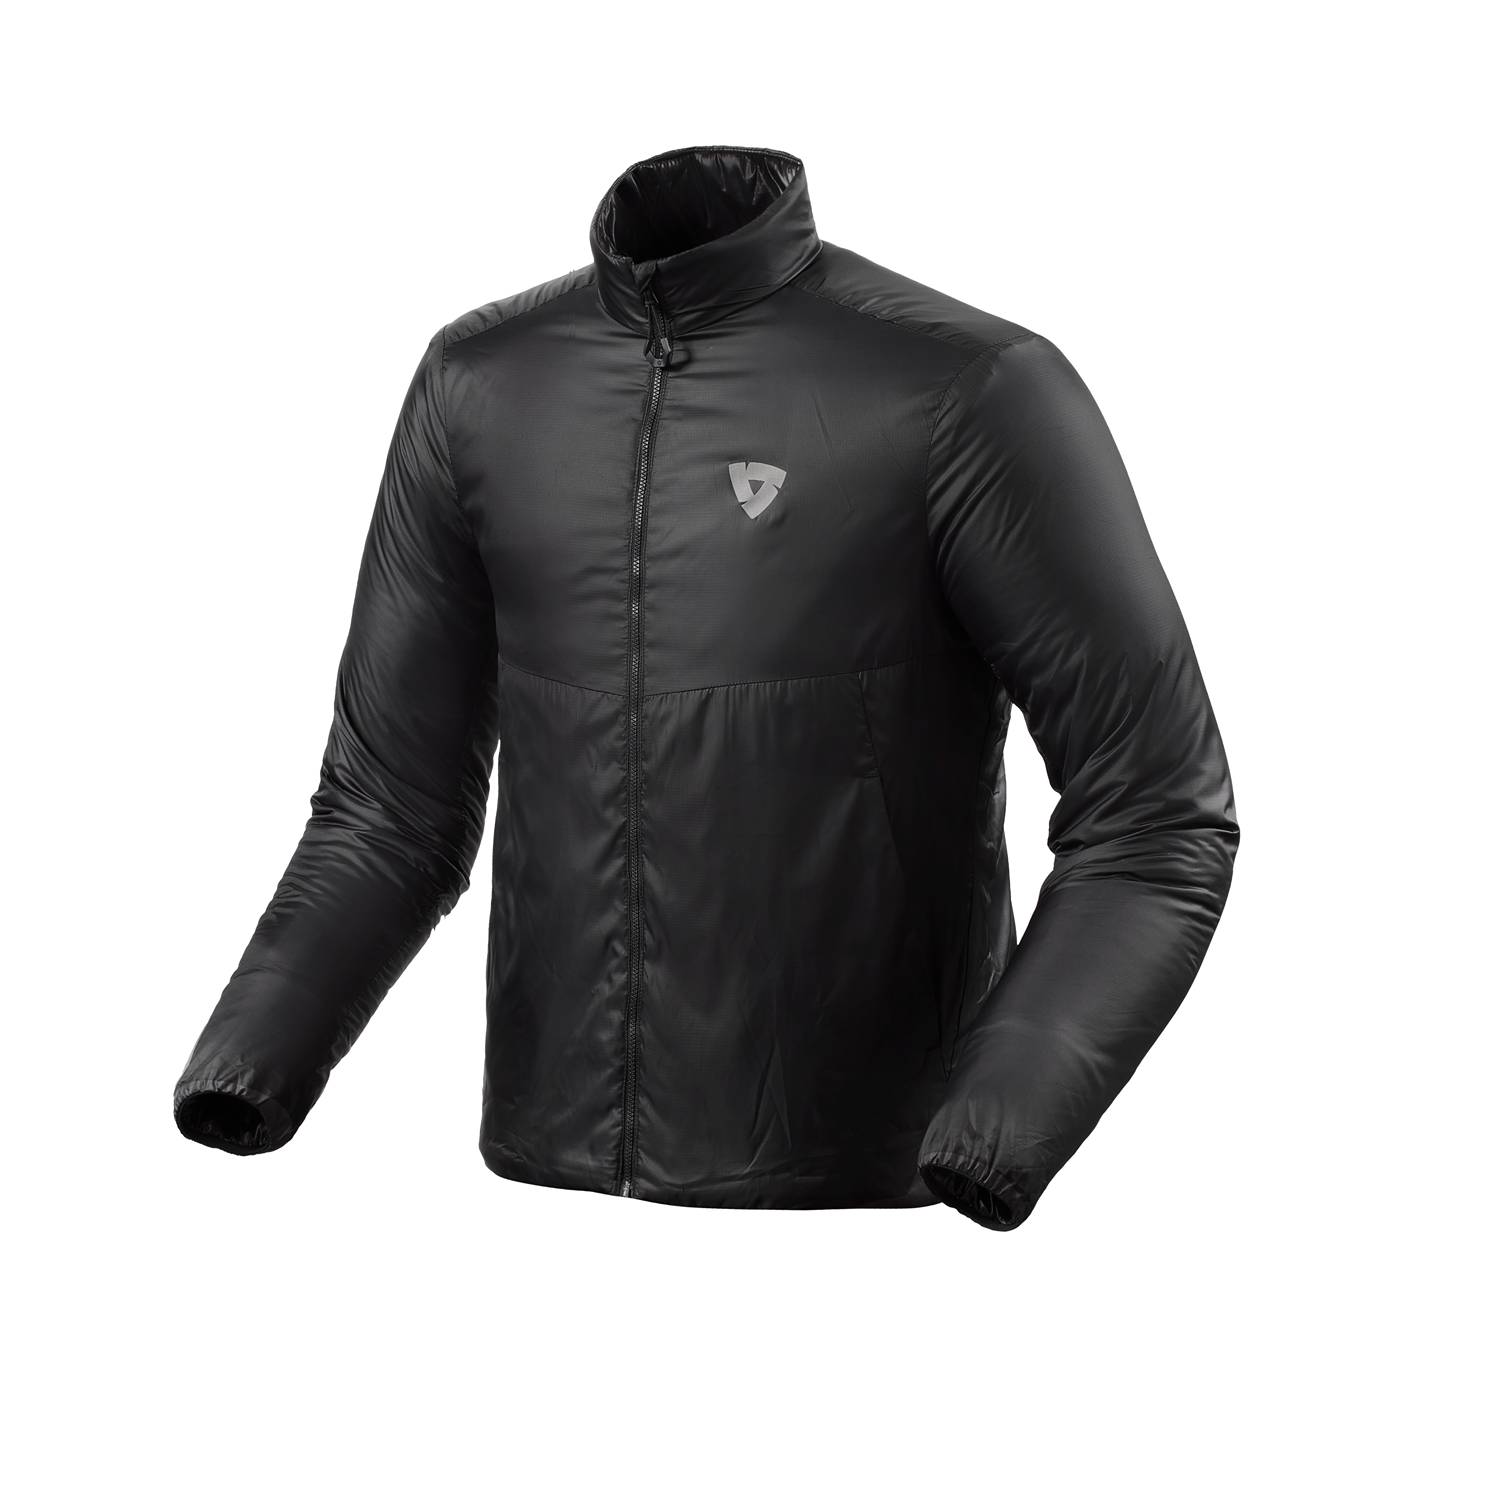 Image of REV'IT! Core 2 Mid Layer Jacket Black Size 3XL ID 8700001372466